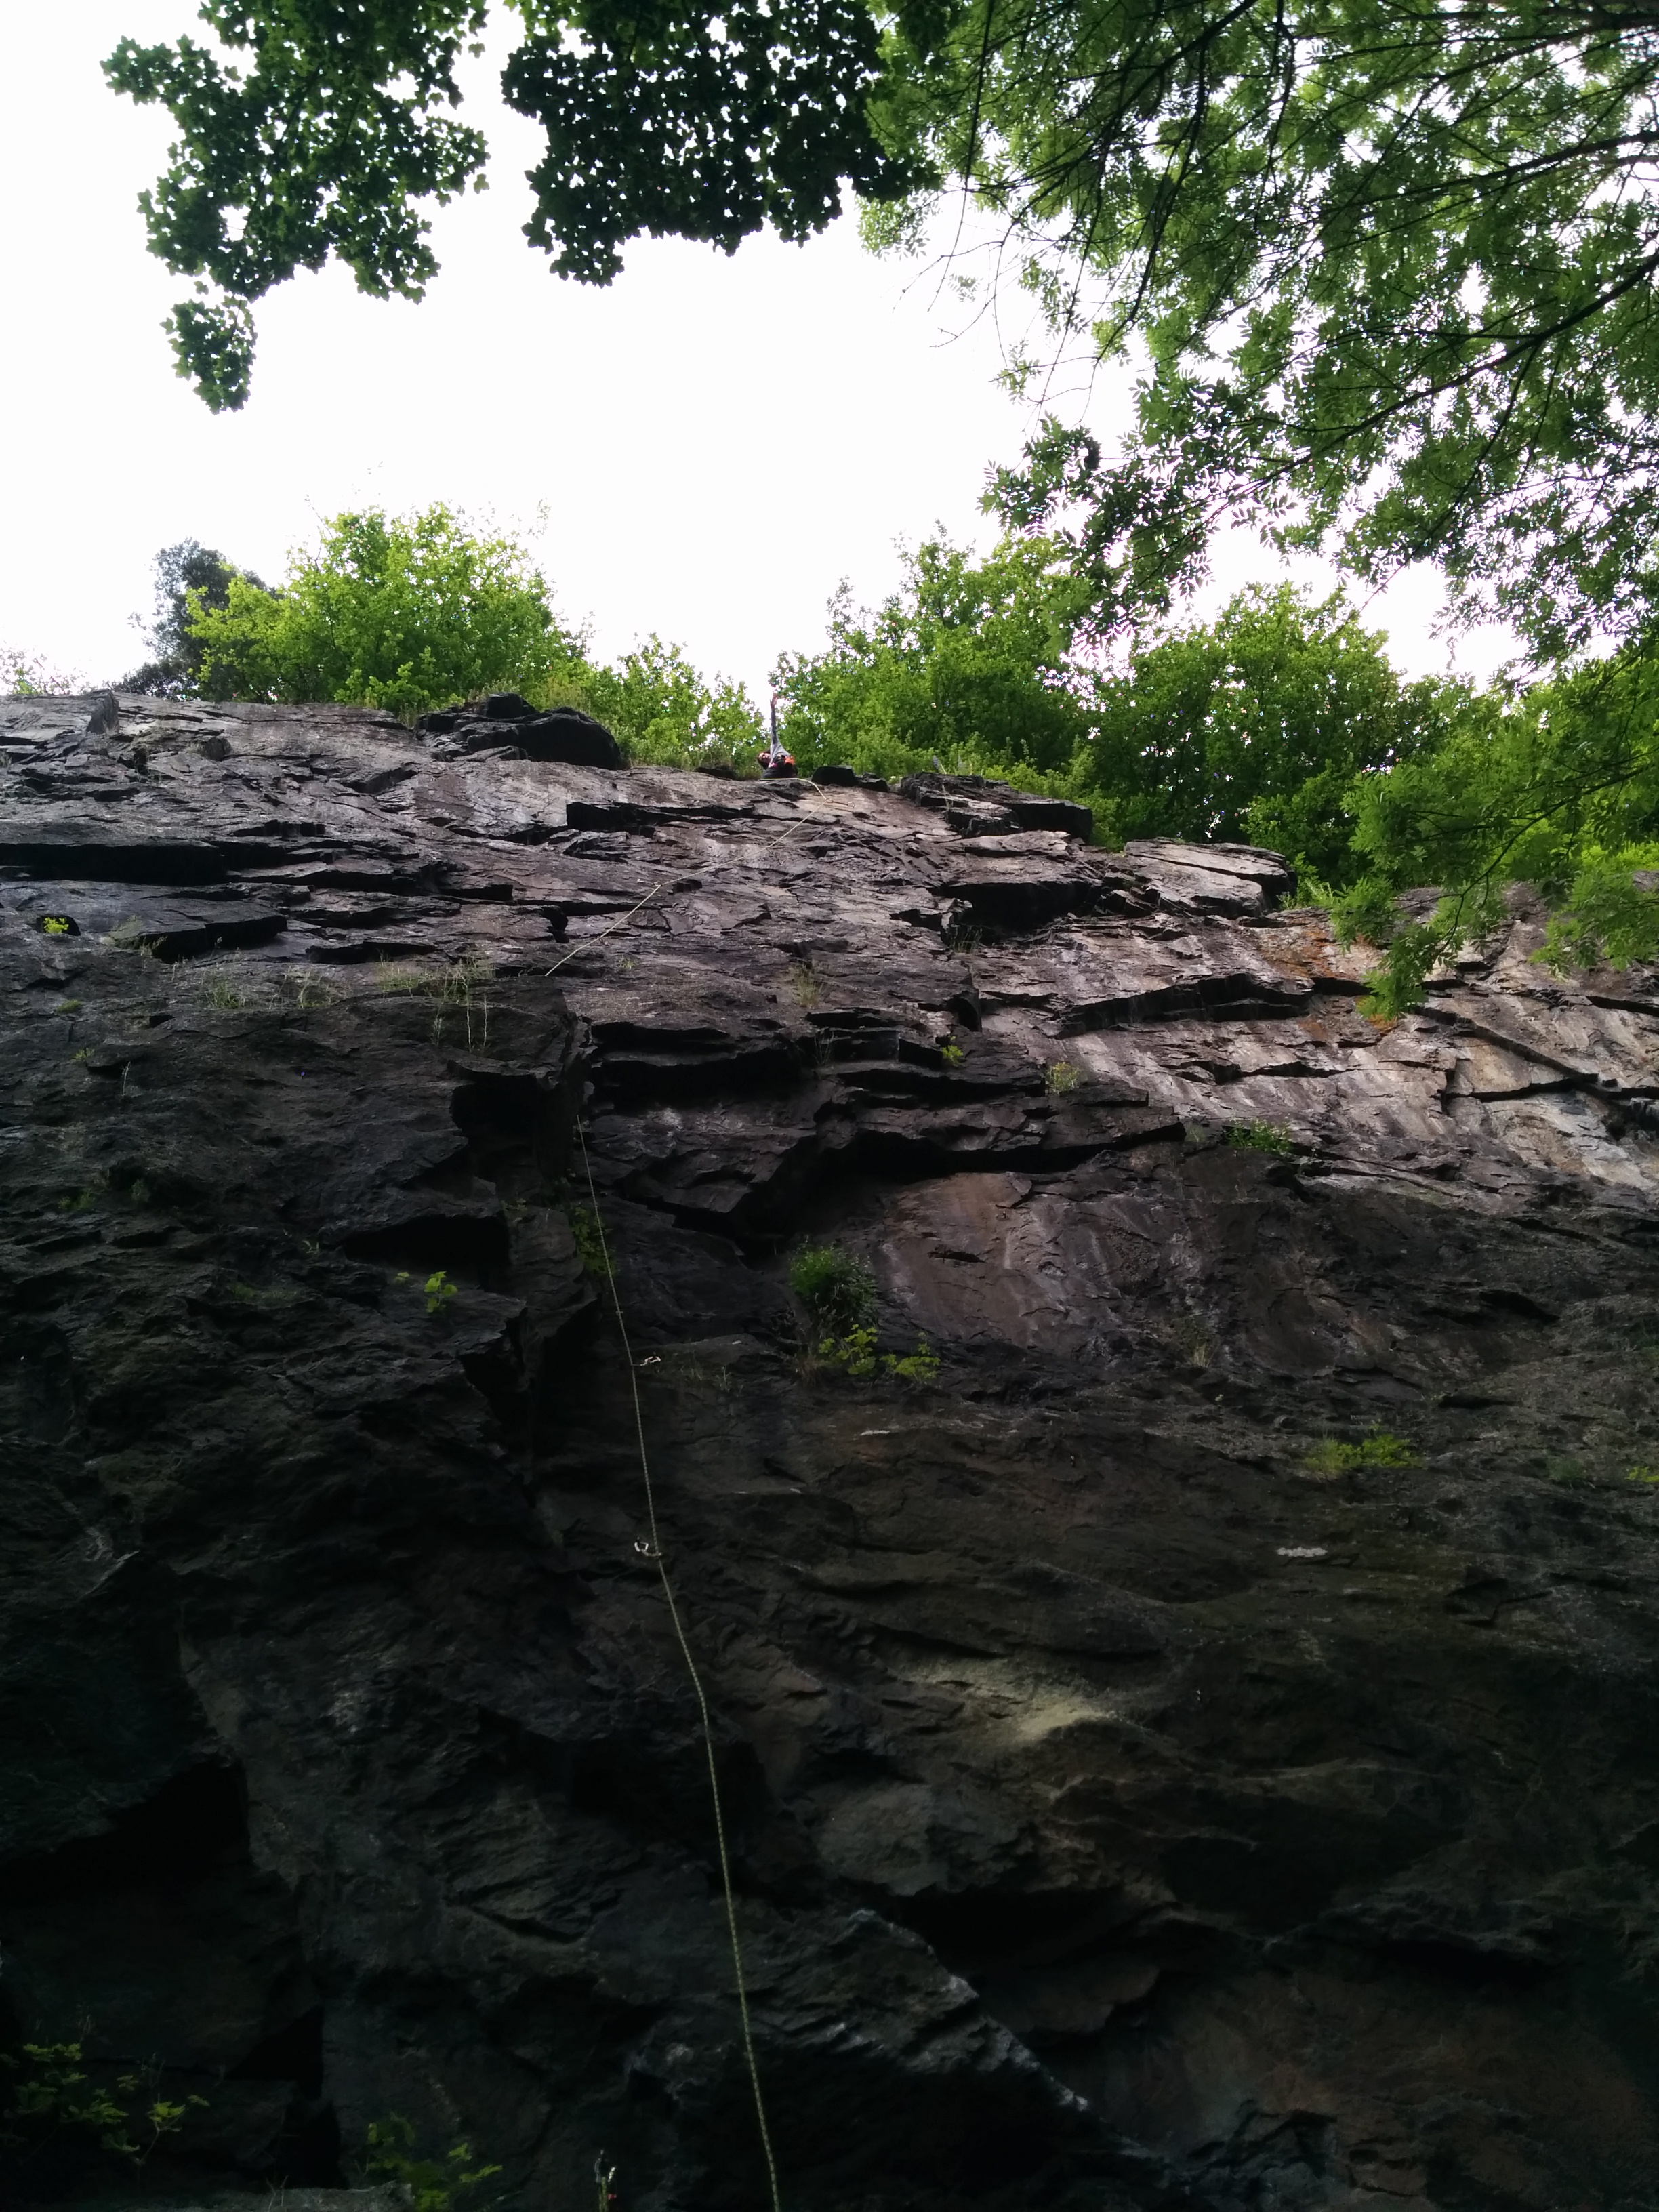 My first independent lead climb on a rock